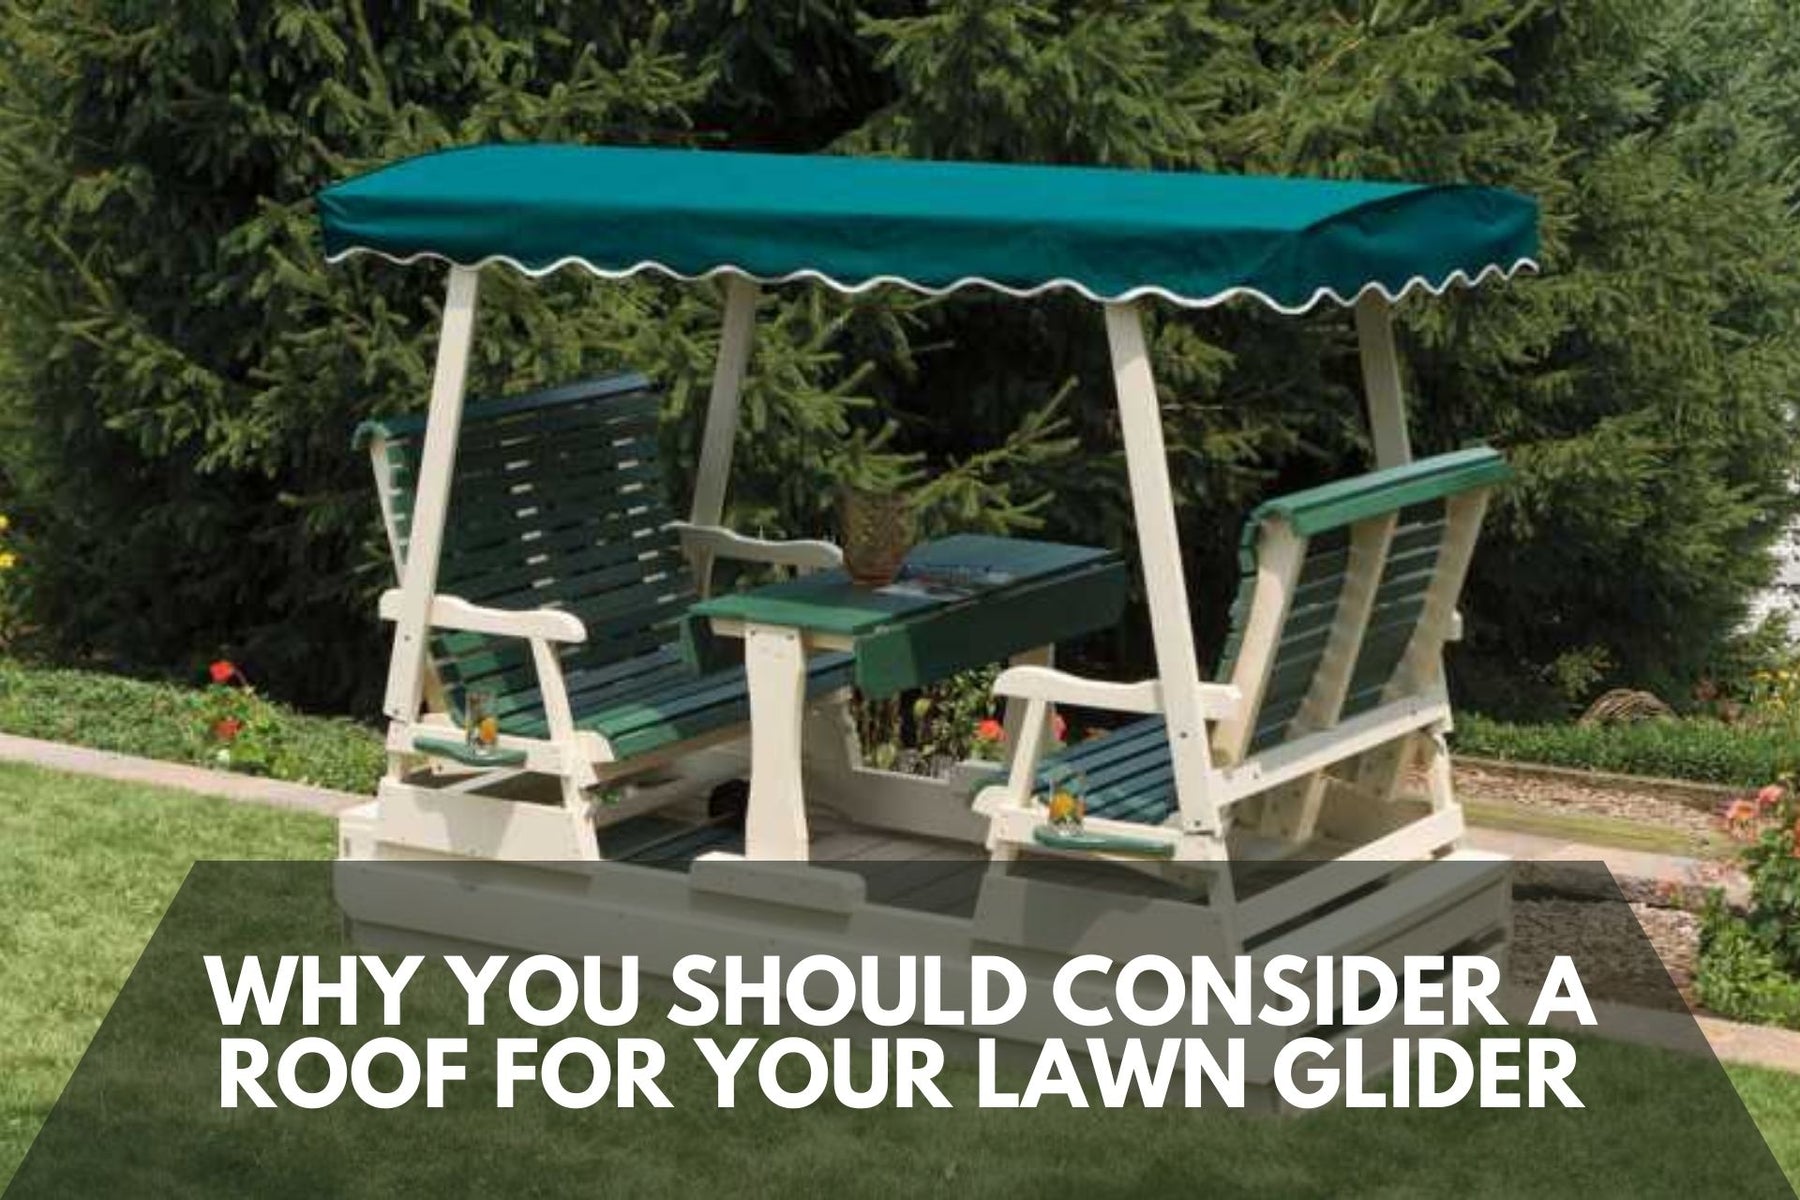 Double lawn glider with roof